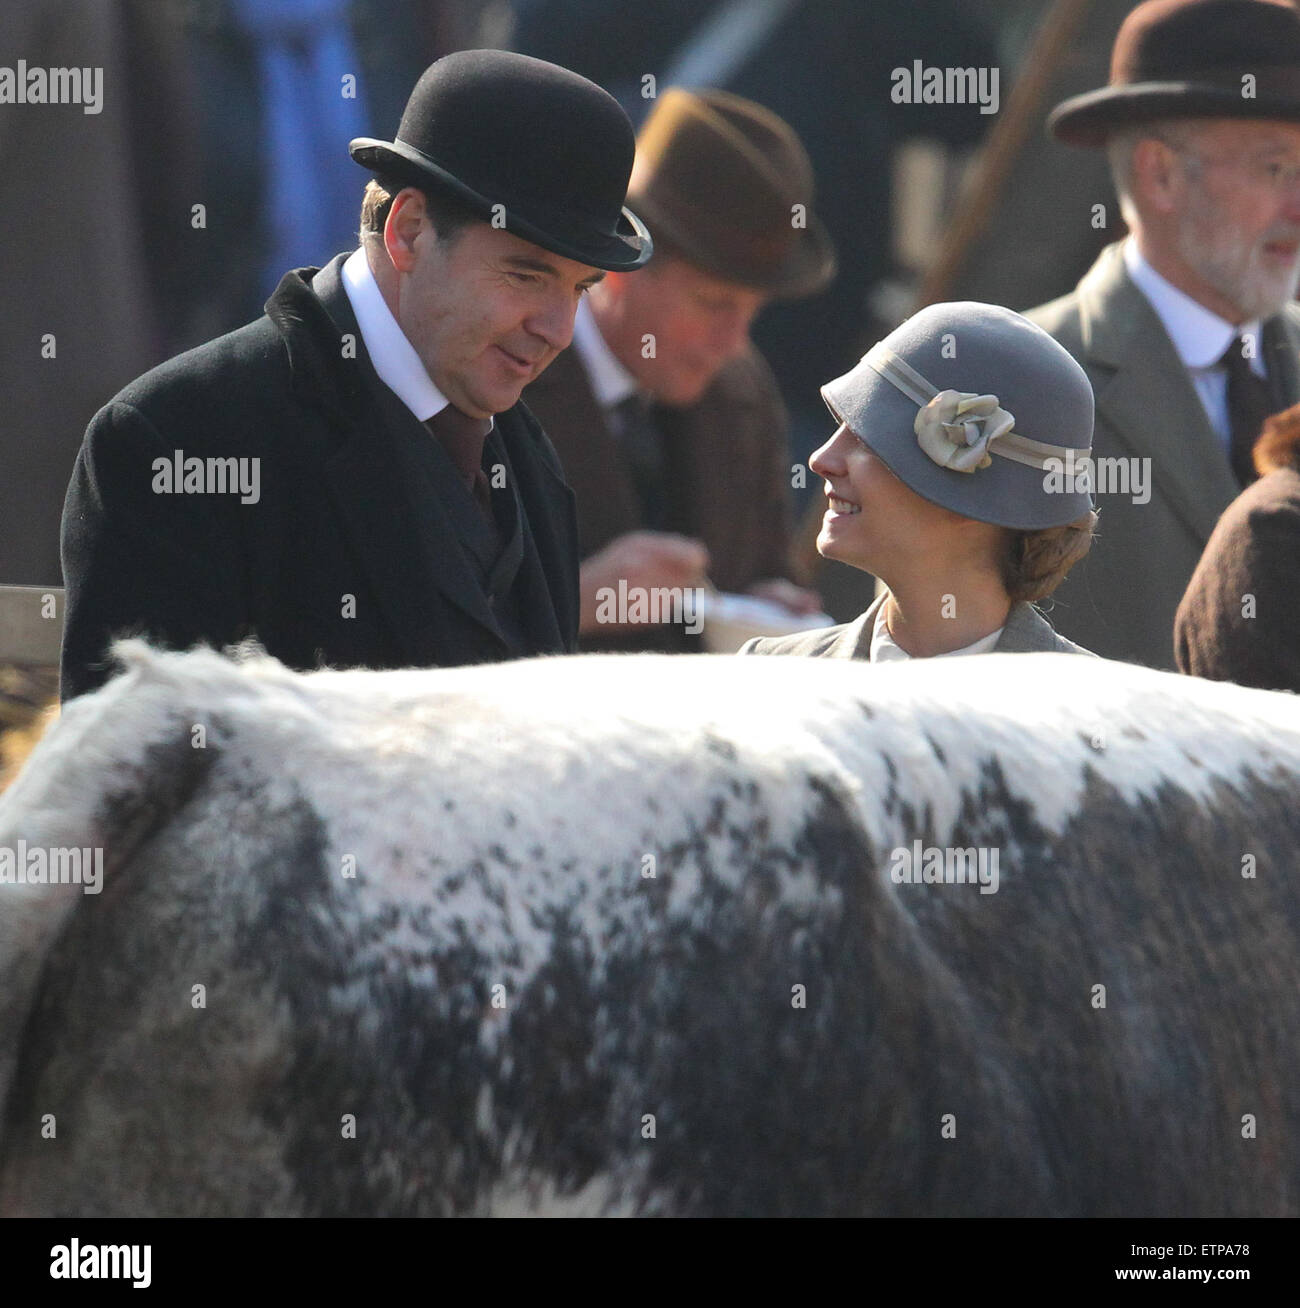 Cast shoot scenes for the new series of Downton Abbey in Wiltshire  Featuring: Brendan Coyle, Joanne Froggatt Where: Wiltshire, United Kingdom When: 20 Mar 2015 Credit: WENN.com Stock Photo